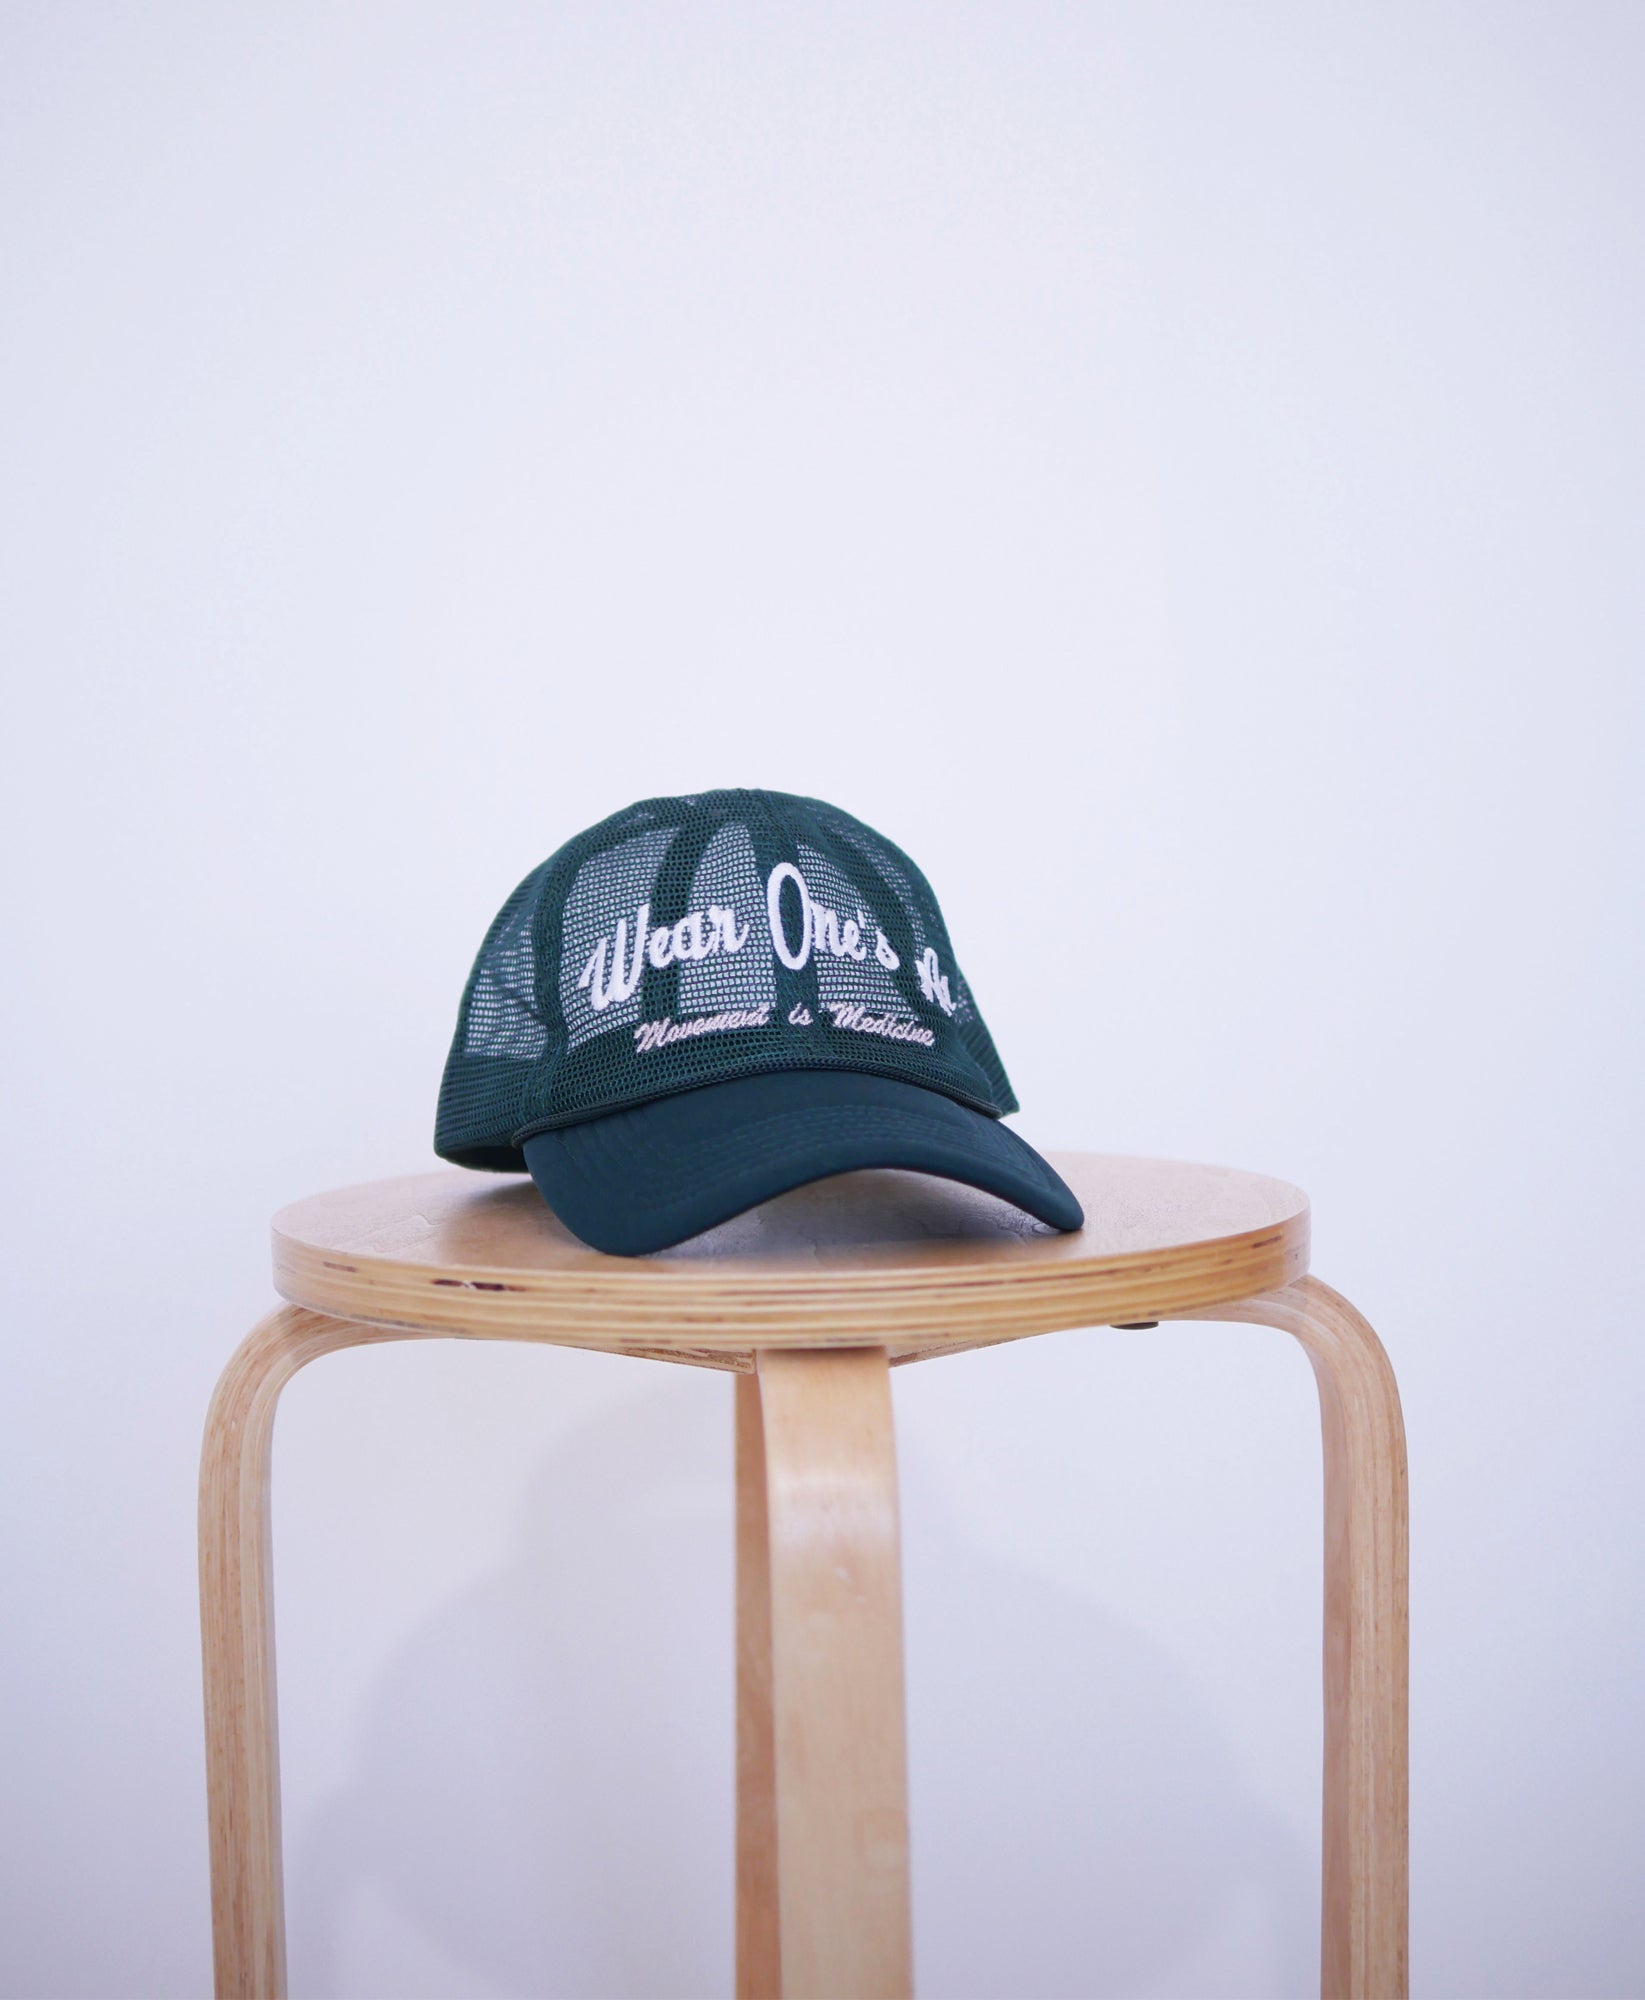 Wear One's At Logo Trucker Hat in Pine Front Closeup View